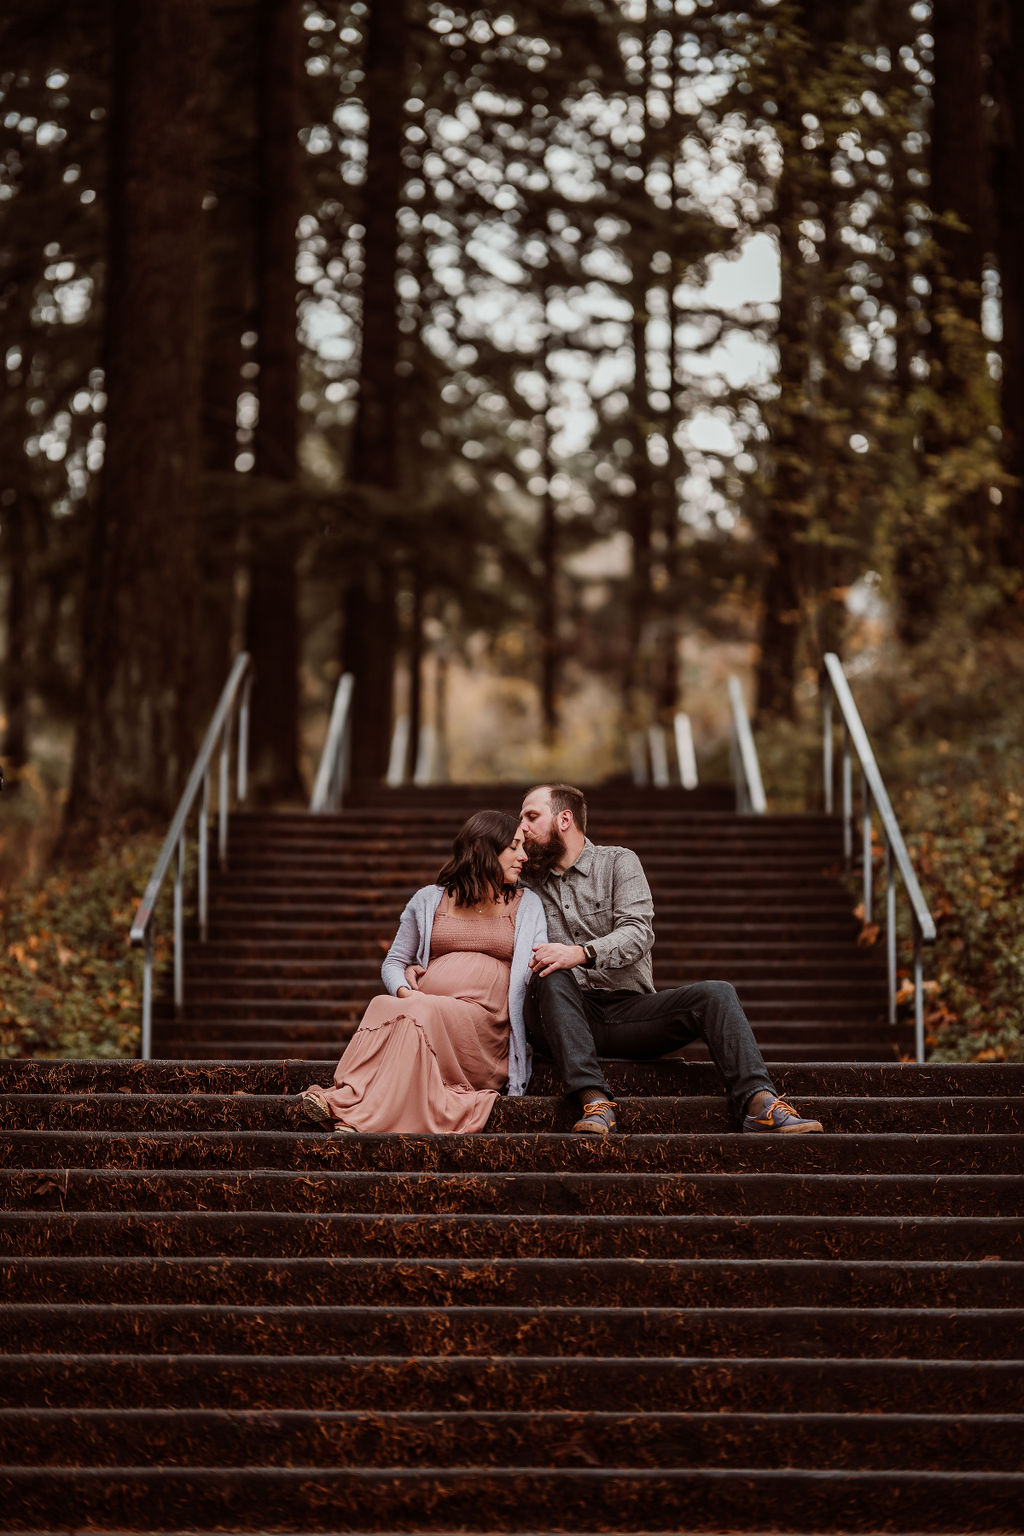 Maternity Photography by Natalie Broders at Mt Tabor Park in Portland, OR - November